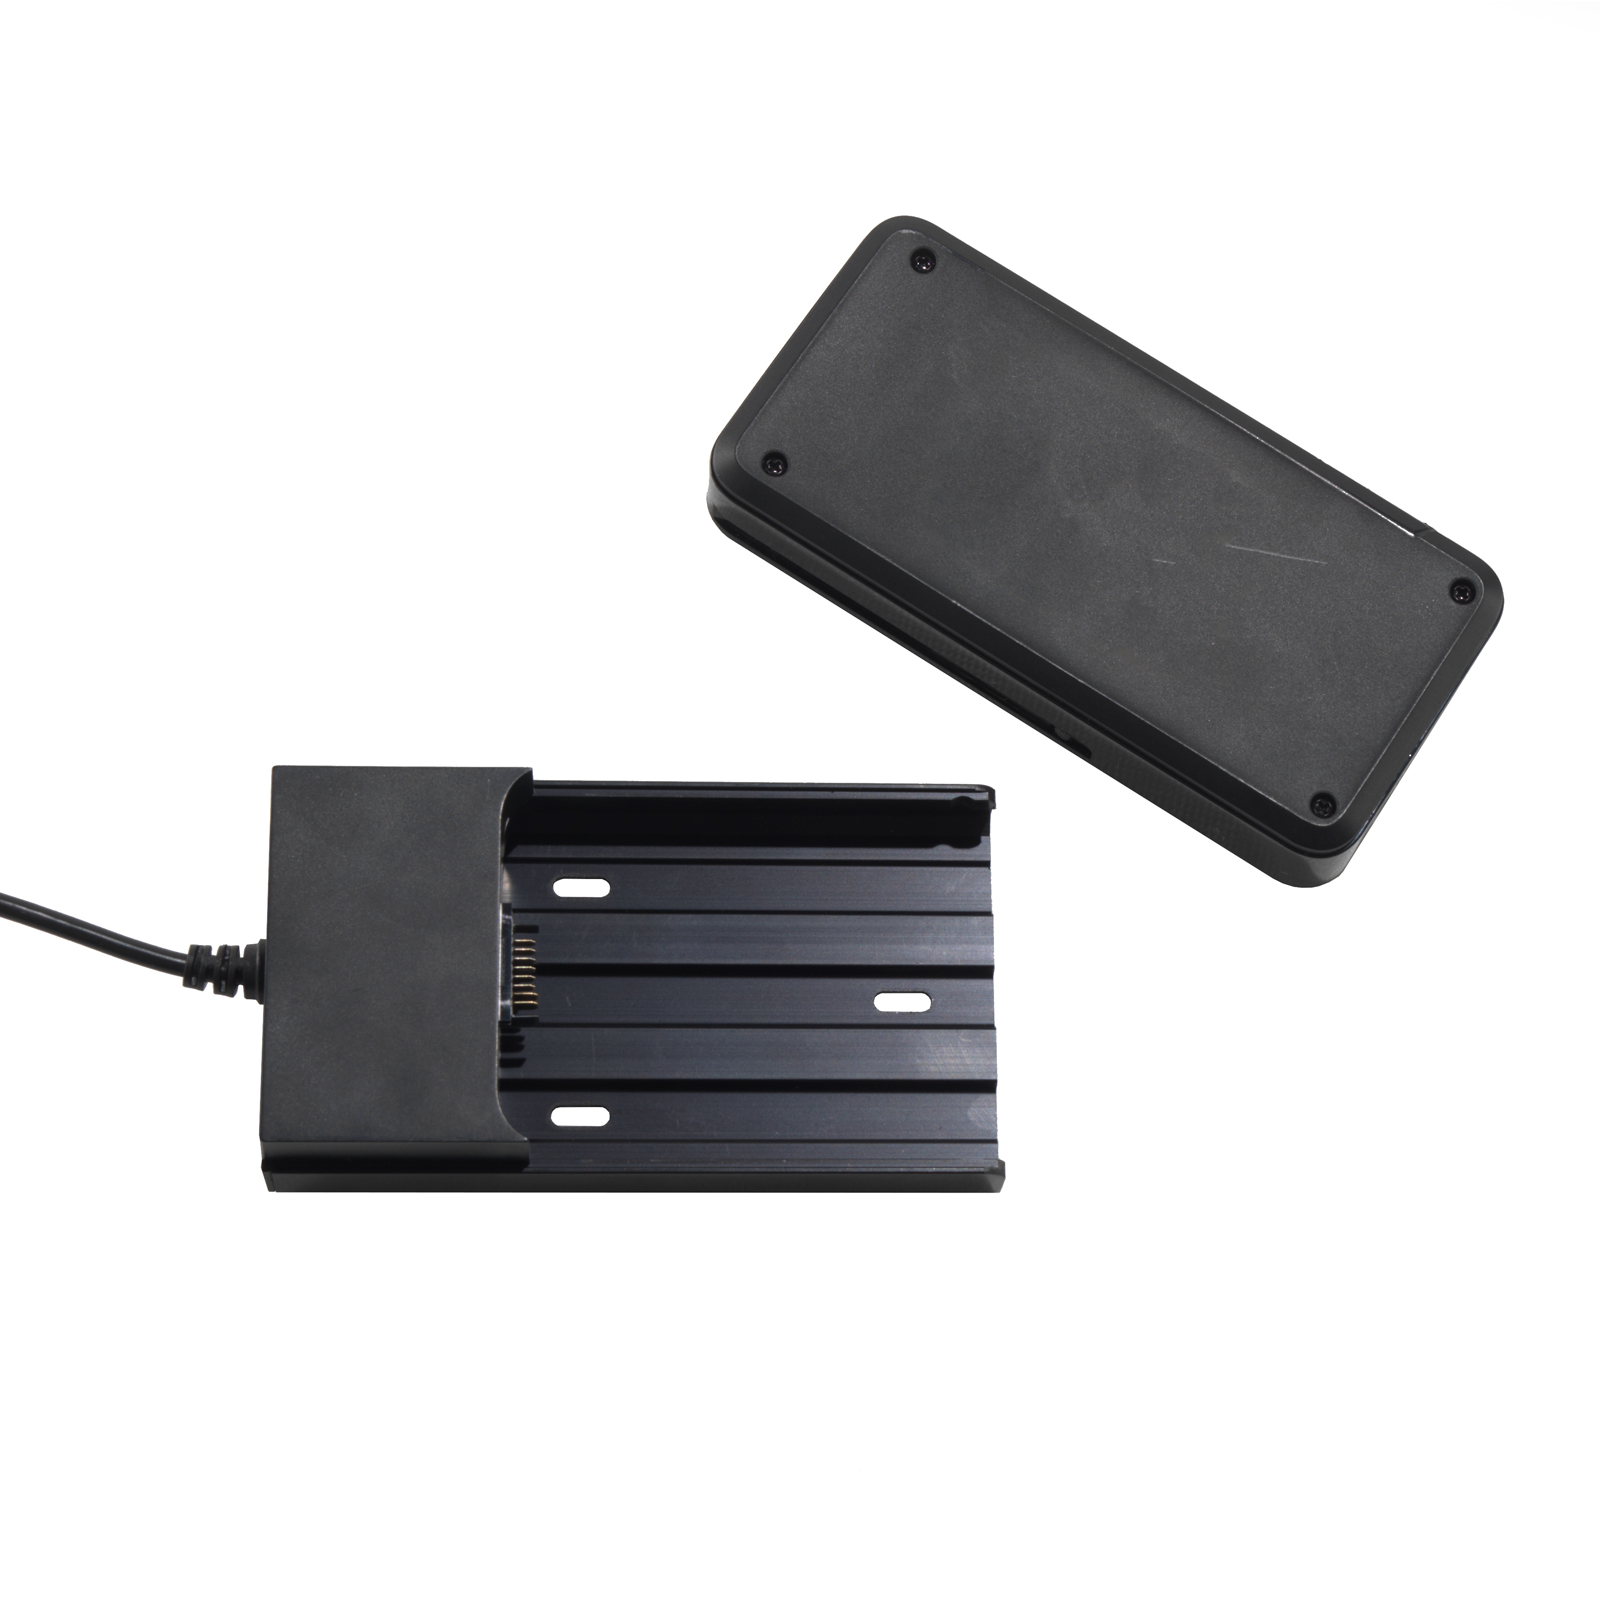 Elev8 Touch Battery Pack